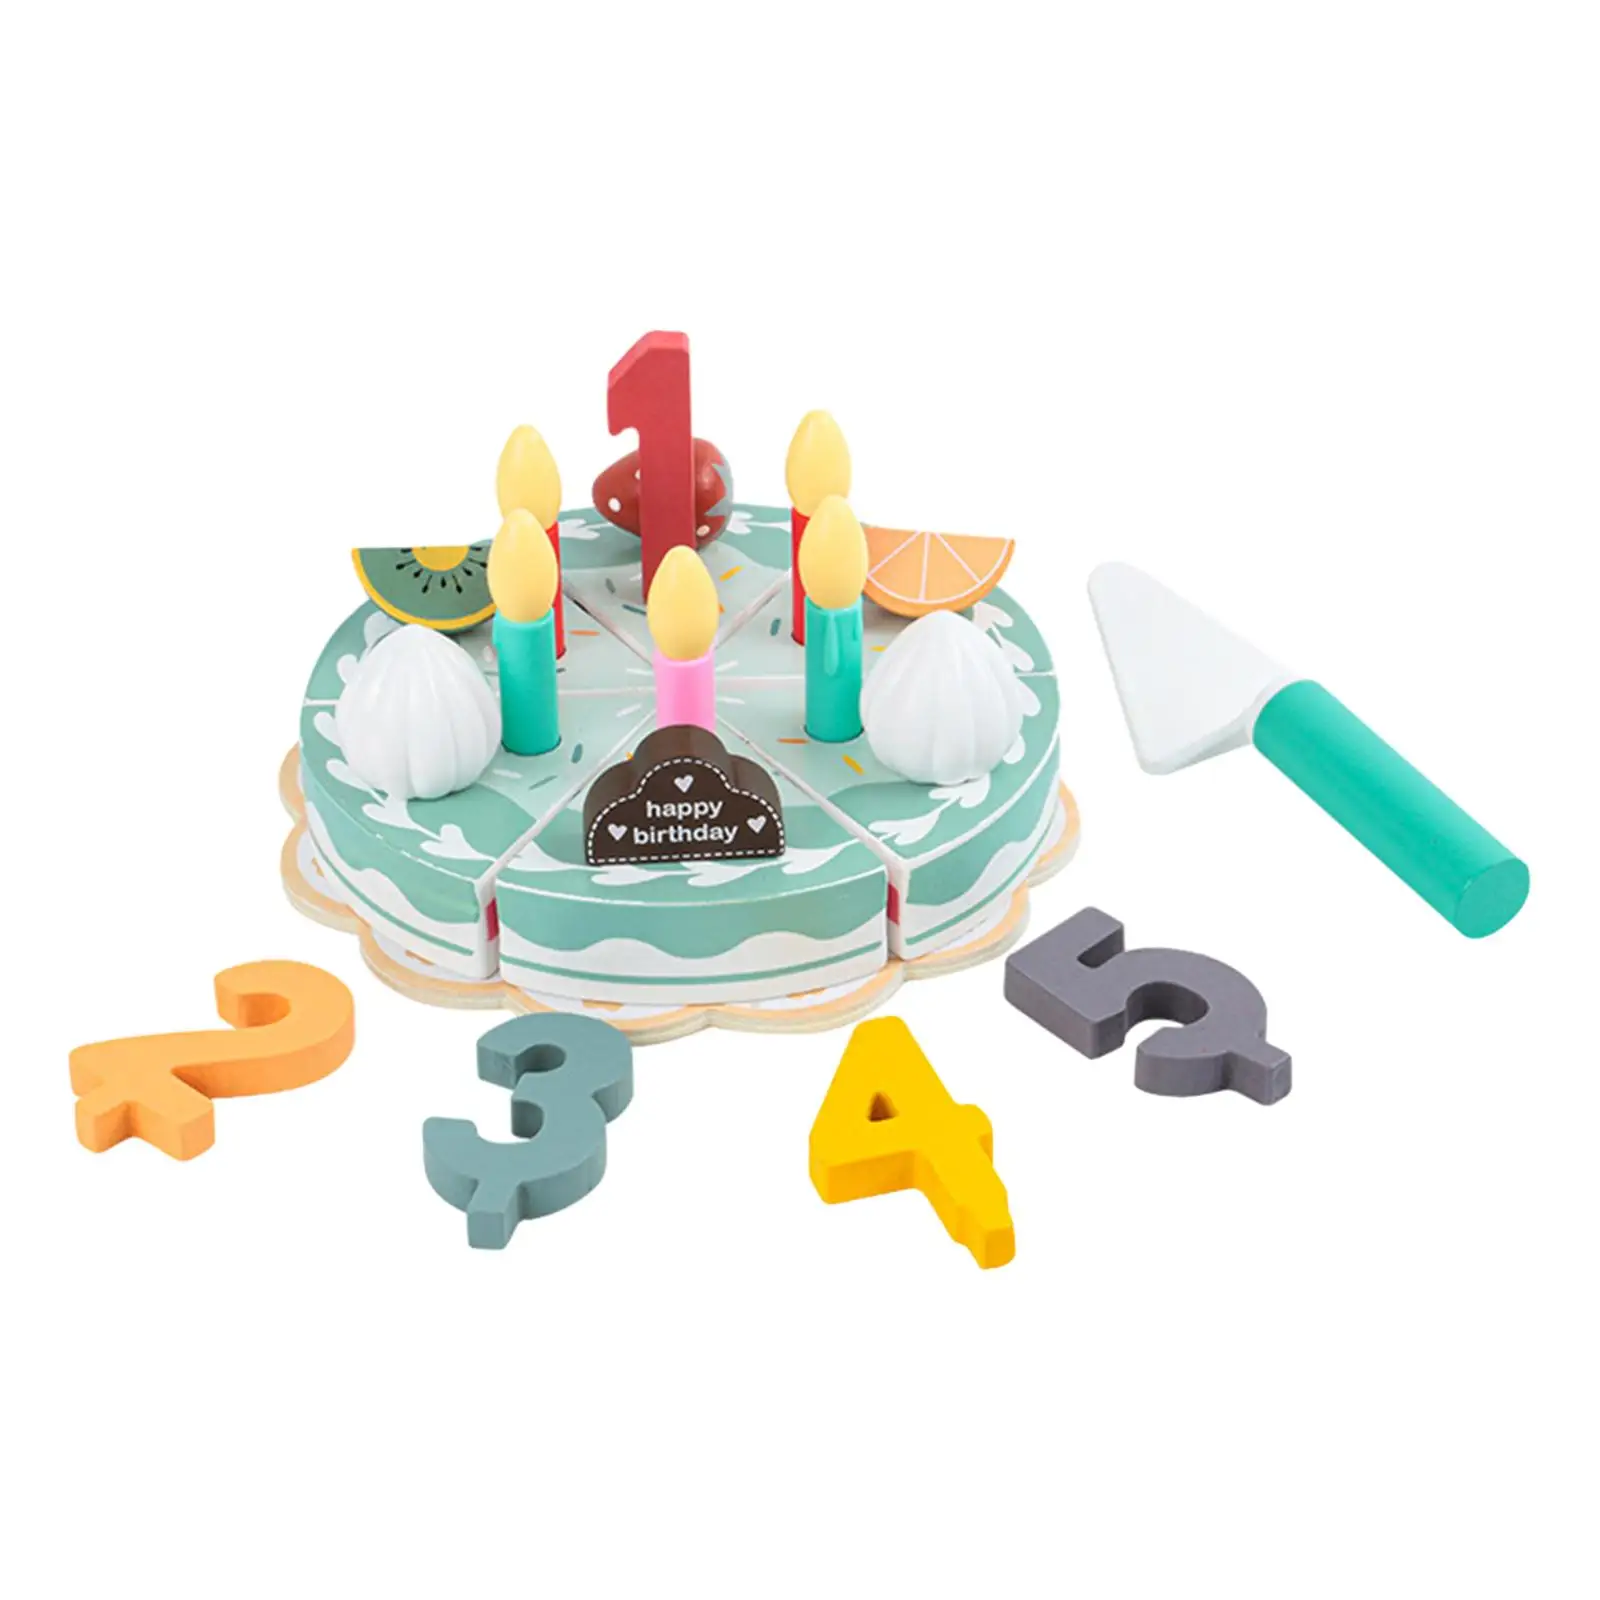 Birthday Cake Cutting Toy Gift Playset with Candles Fruit Accessories for Girls and Boys Kids Toddlers Preschool Children